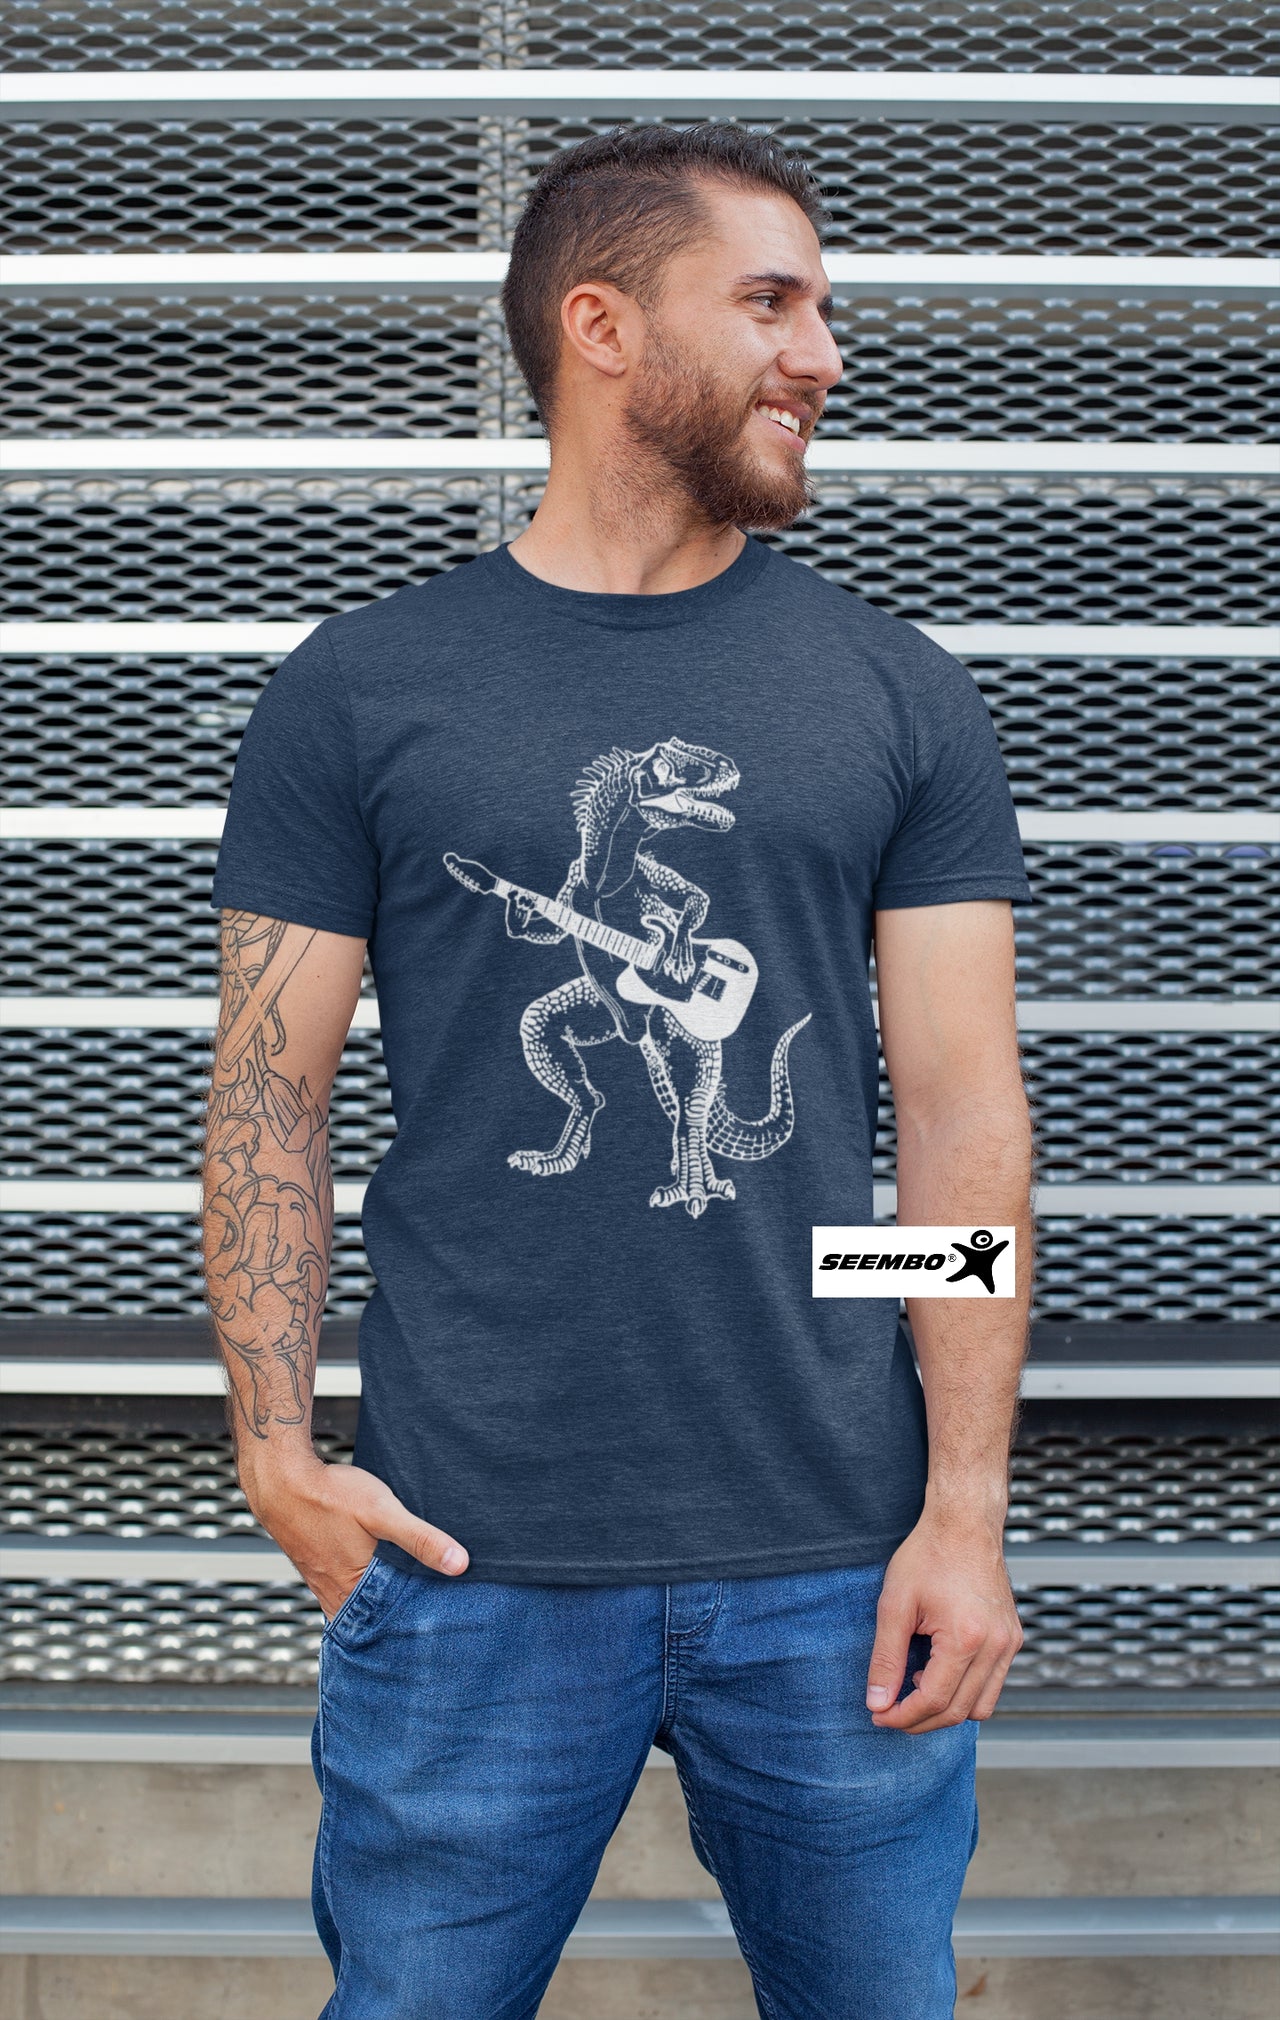 a-man-with-vintage-navy-t-shirt-and-dinosaur-playing-guitar-guitarist-art-on-it